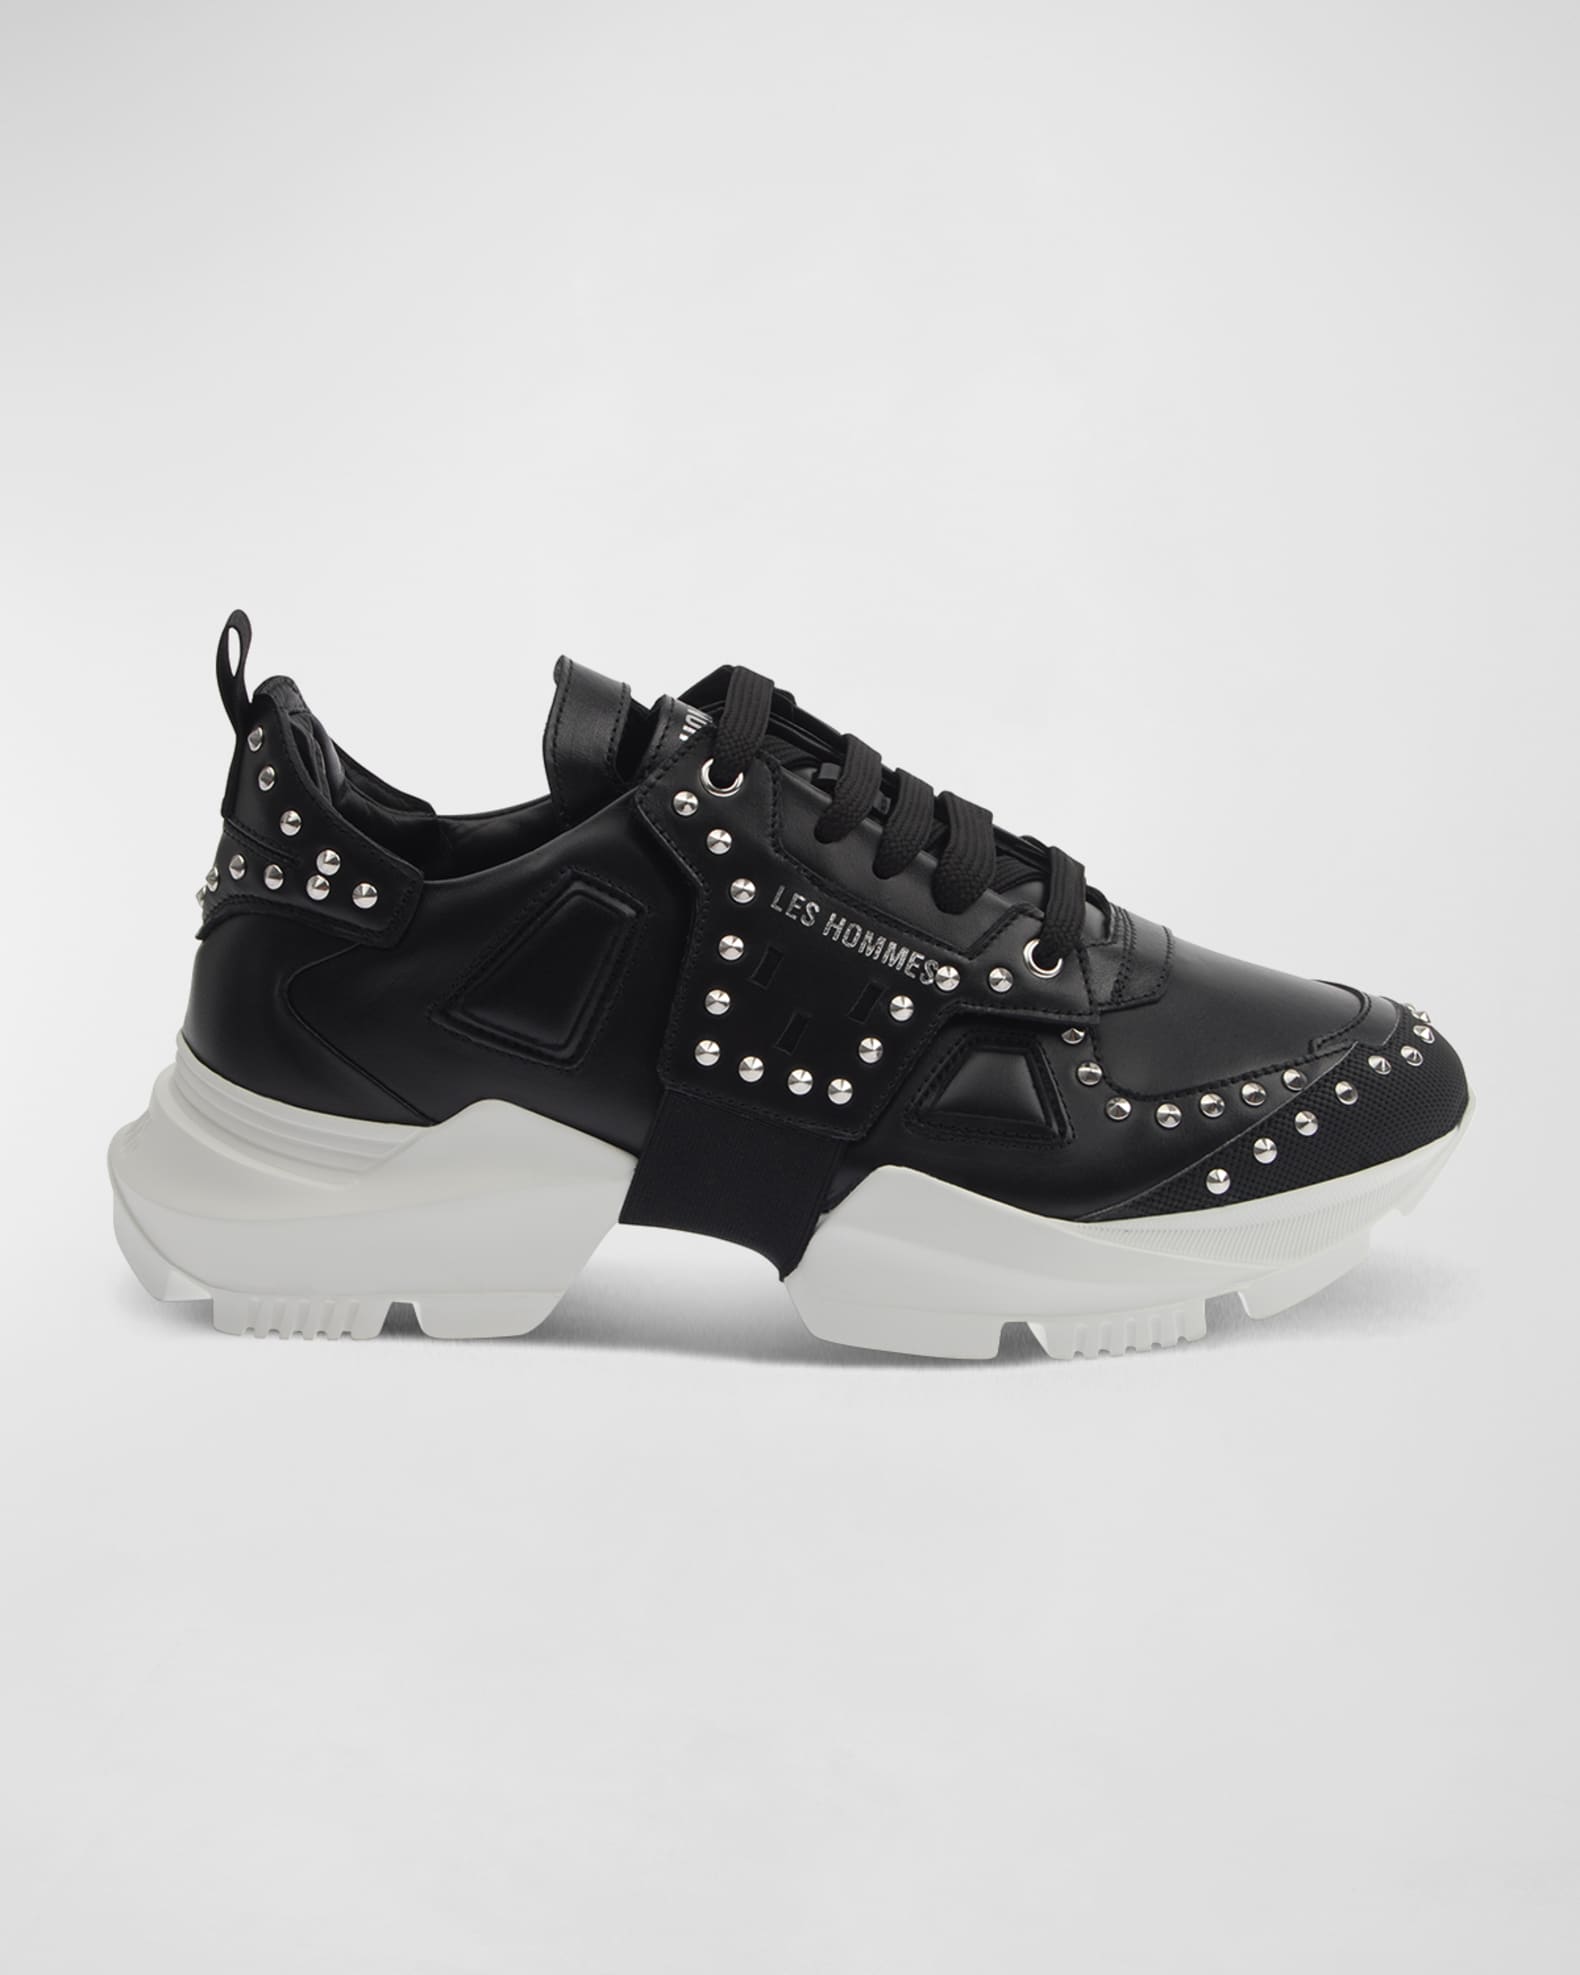 Les Hommes Men's Studded Leather Chunky Low-Top Sneakers | Neiman Marcus